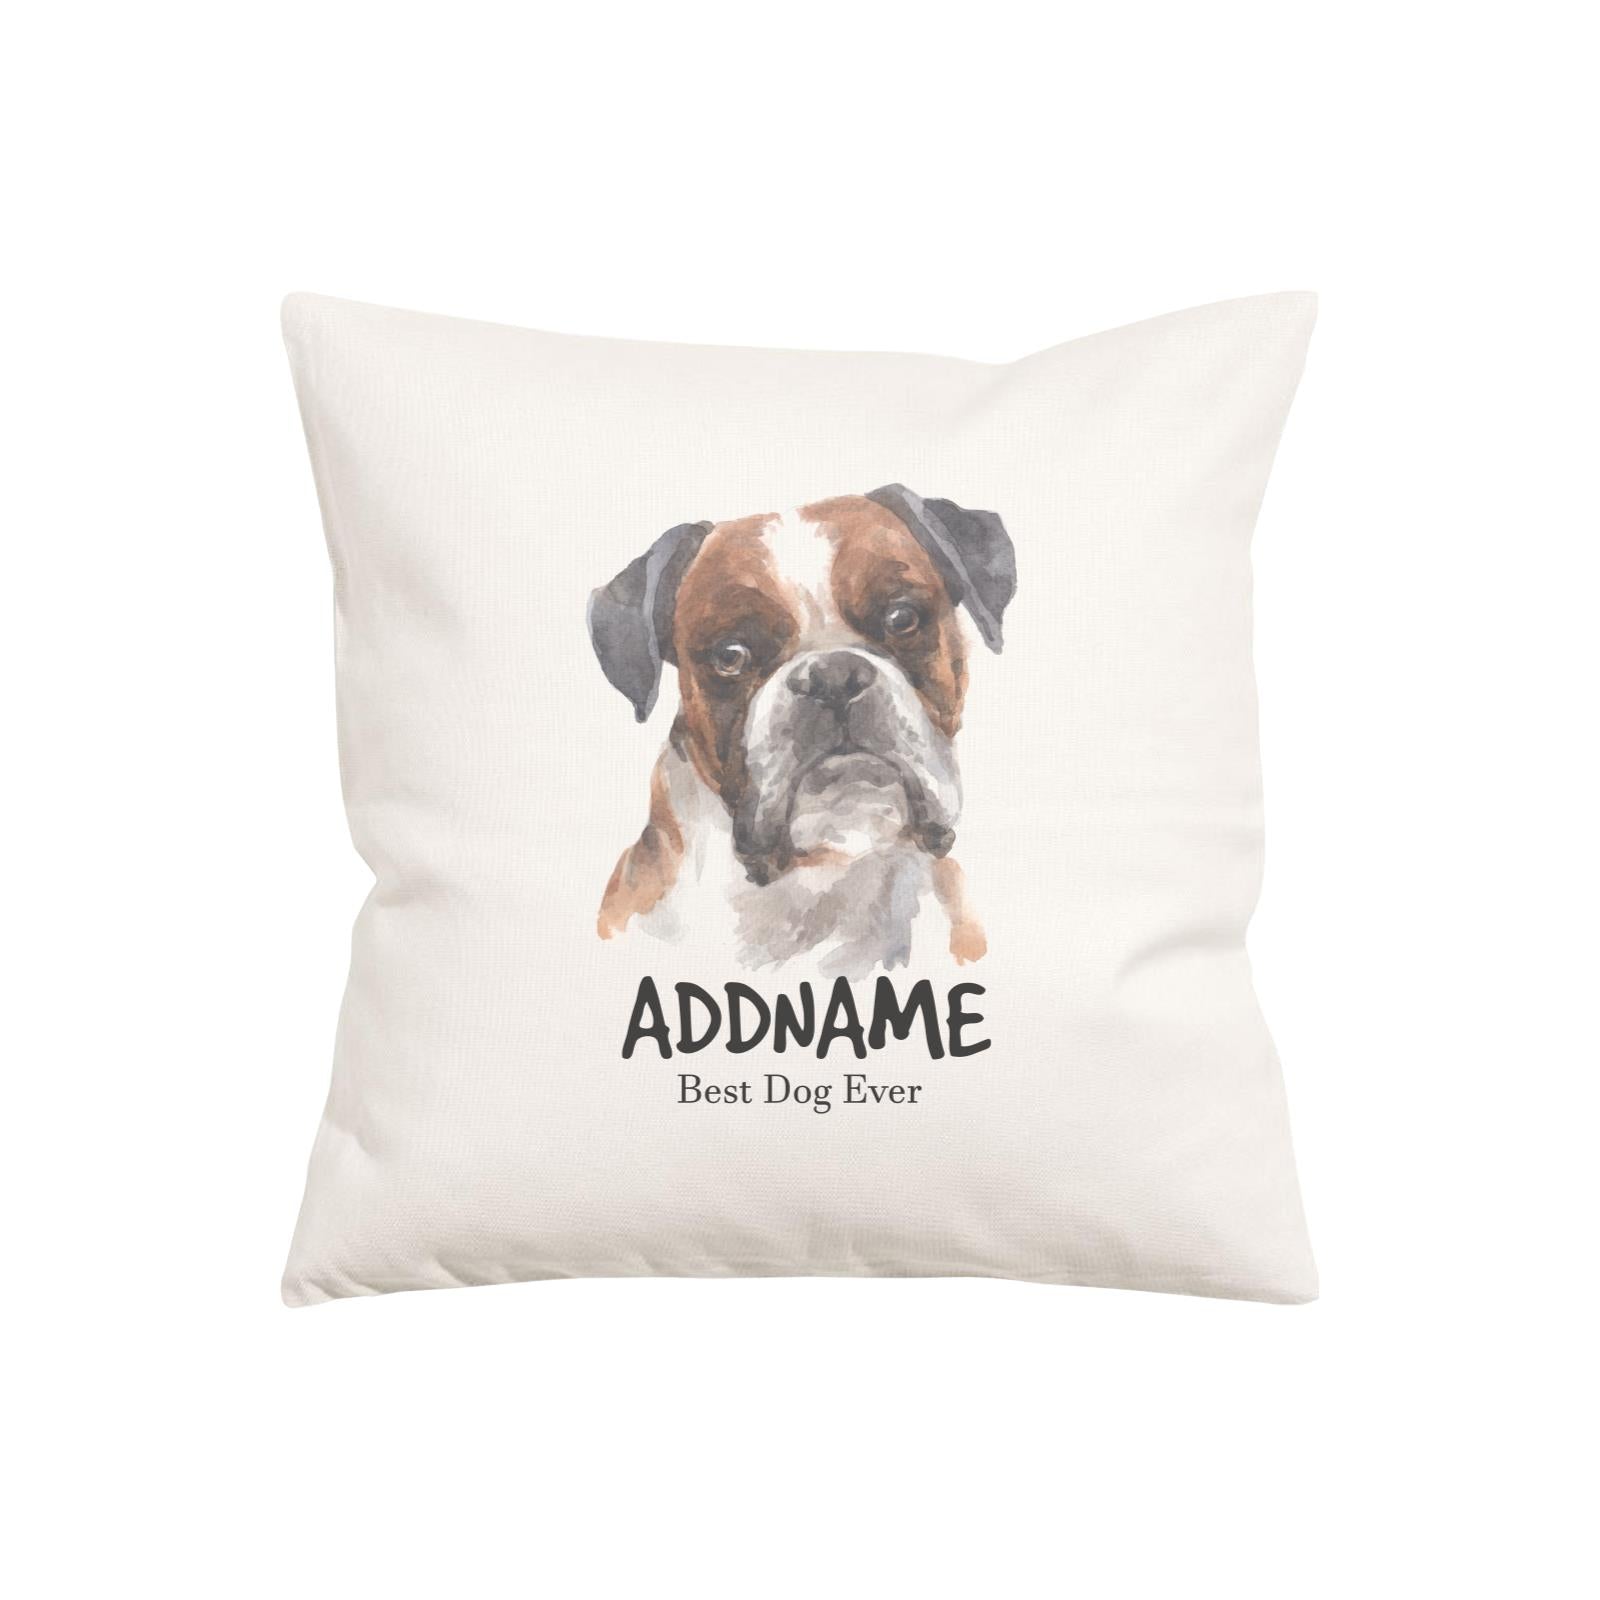 Watercolor Dog Series Boxer Black Ears Best Dog Ever Addname Pillow Cushion